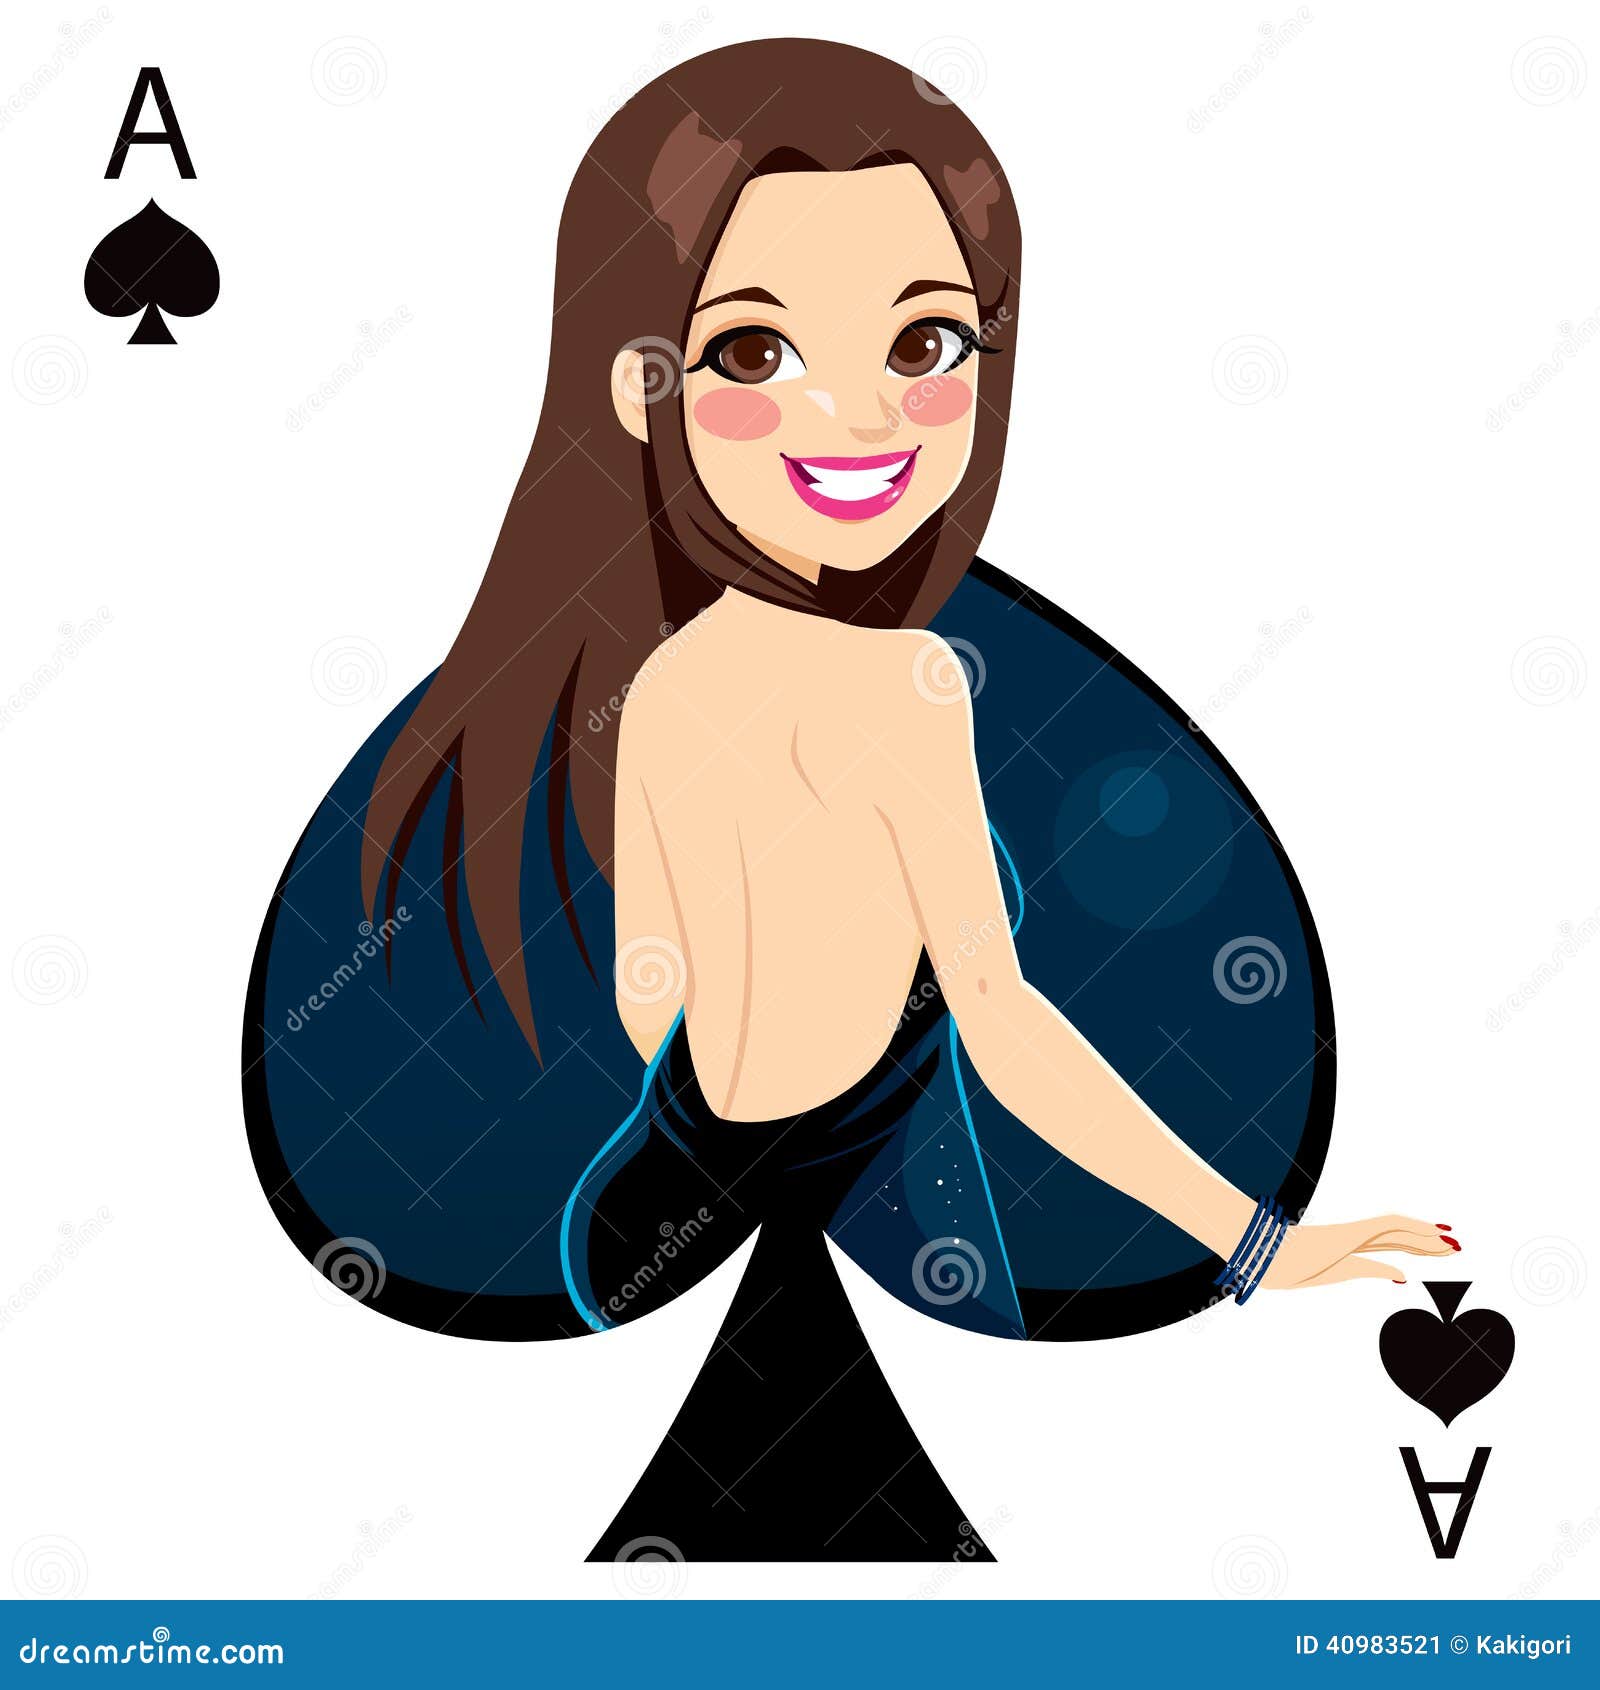 Ace of Spades stock vector. Illustration of chance, spades - 40983521